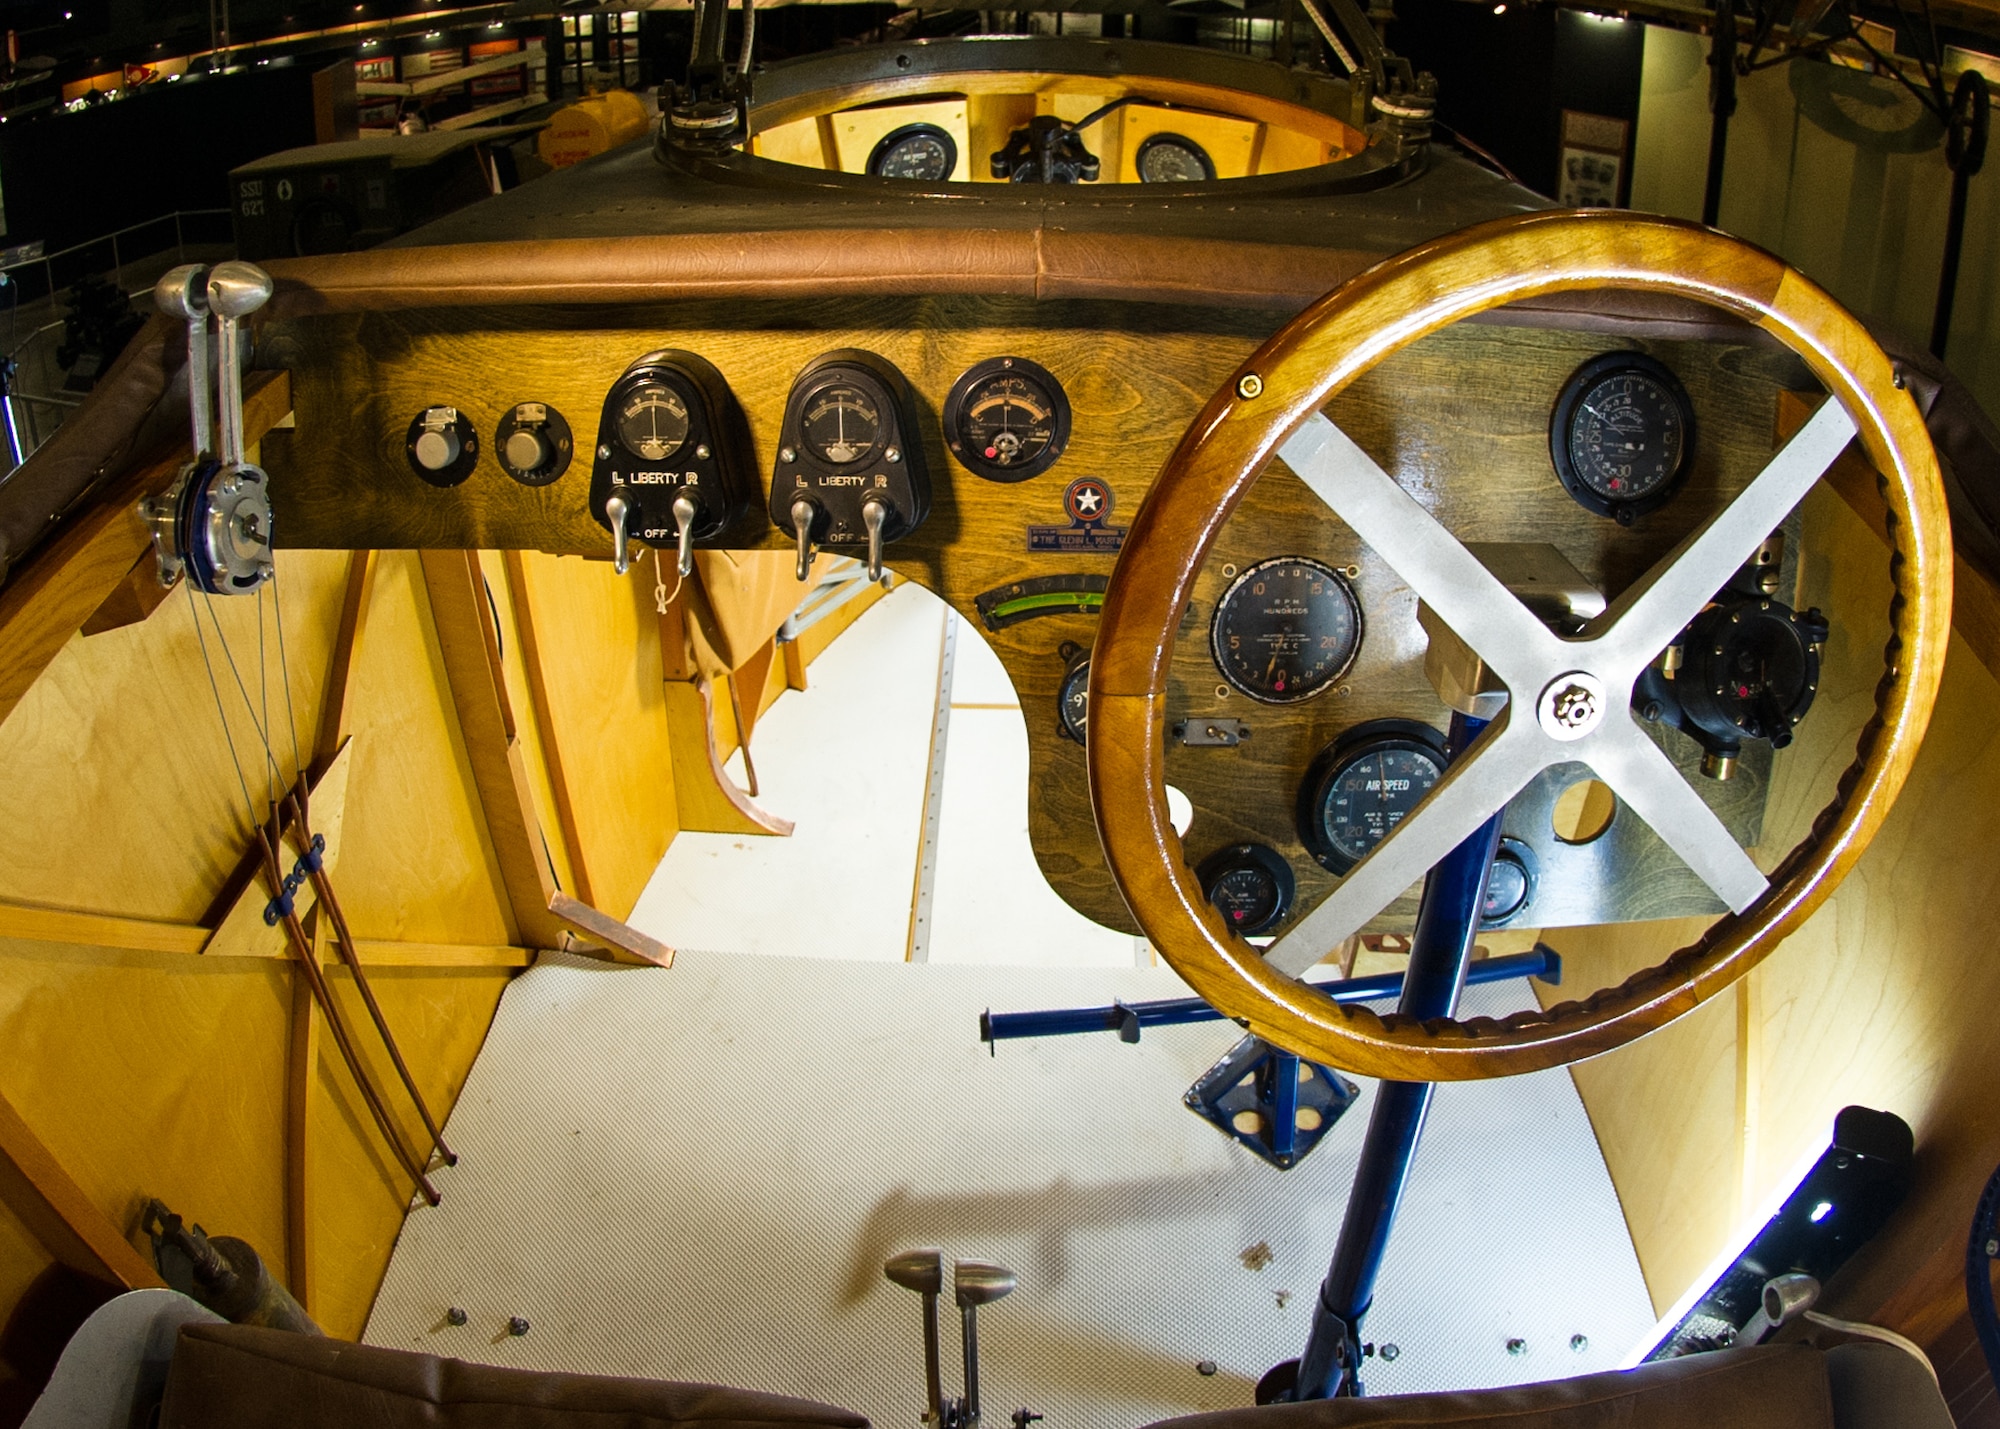 Martin MB-2 cockpit in the Early Years Gallery at the National Museum of the United States Air Force. (U.S. Air Force photo)